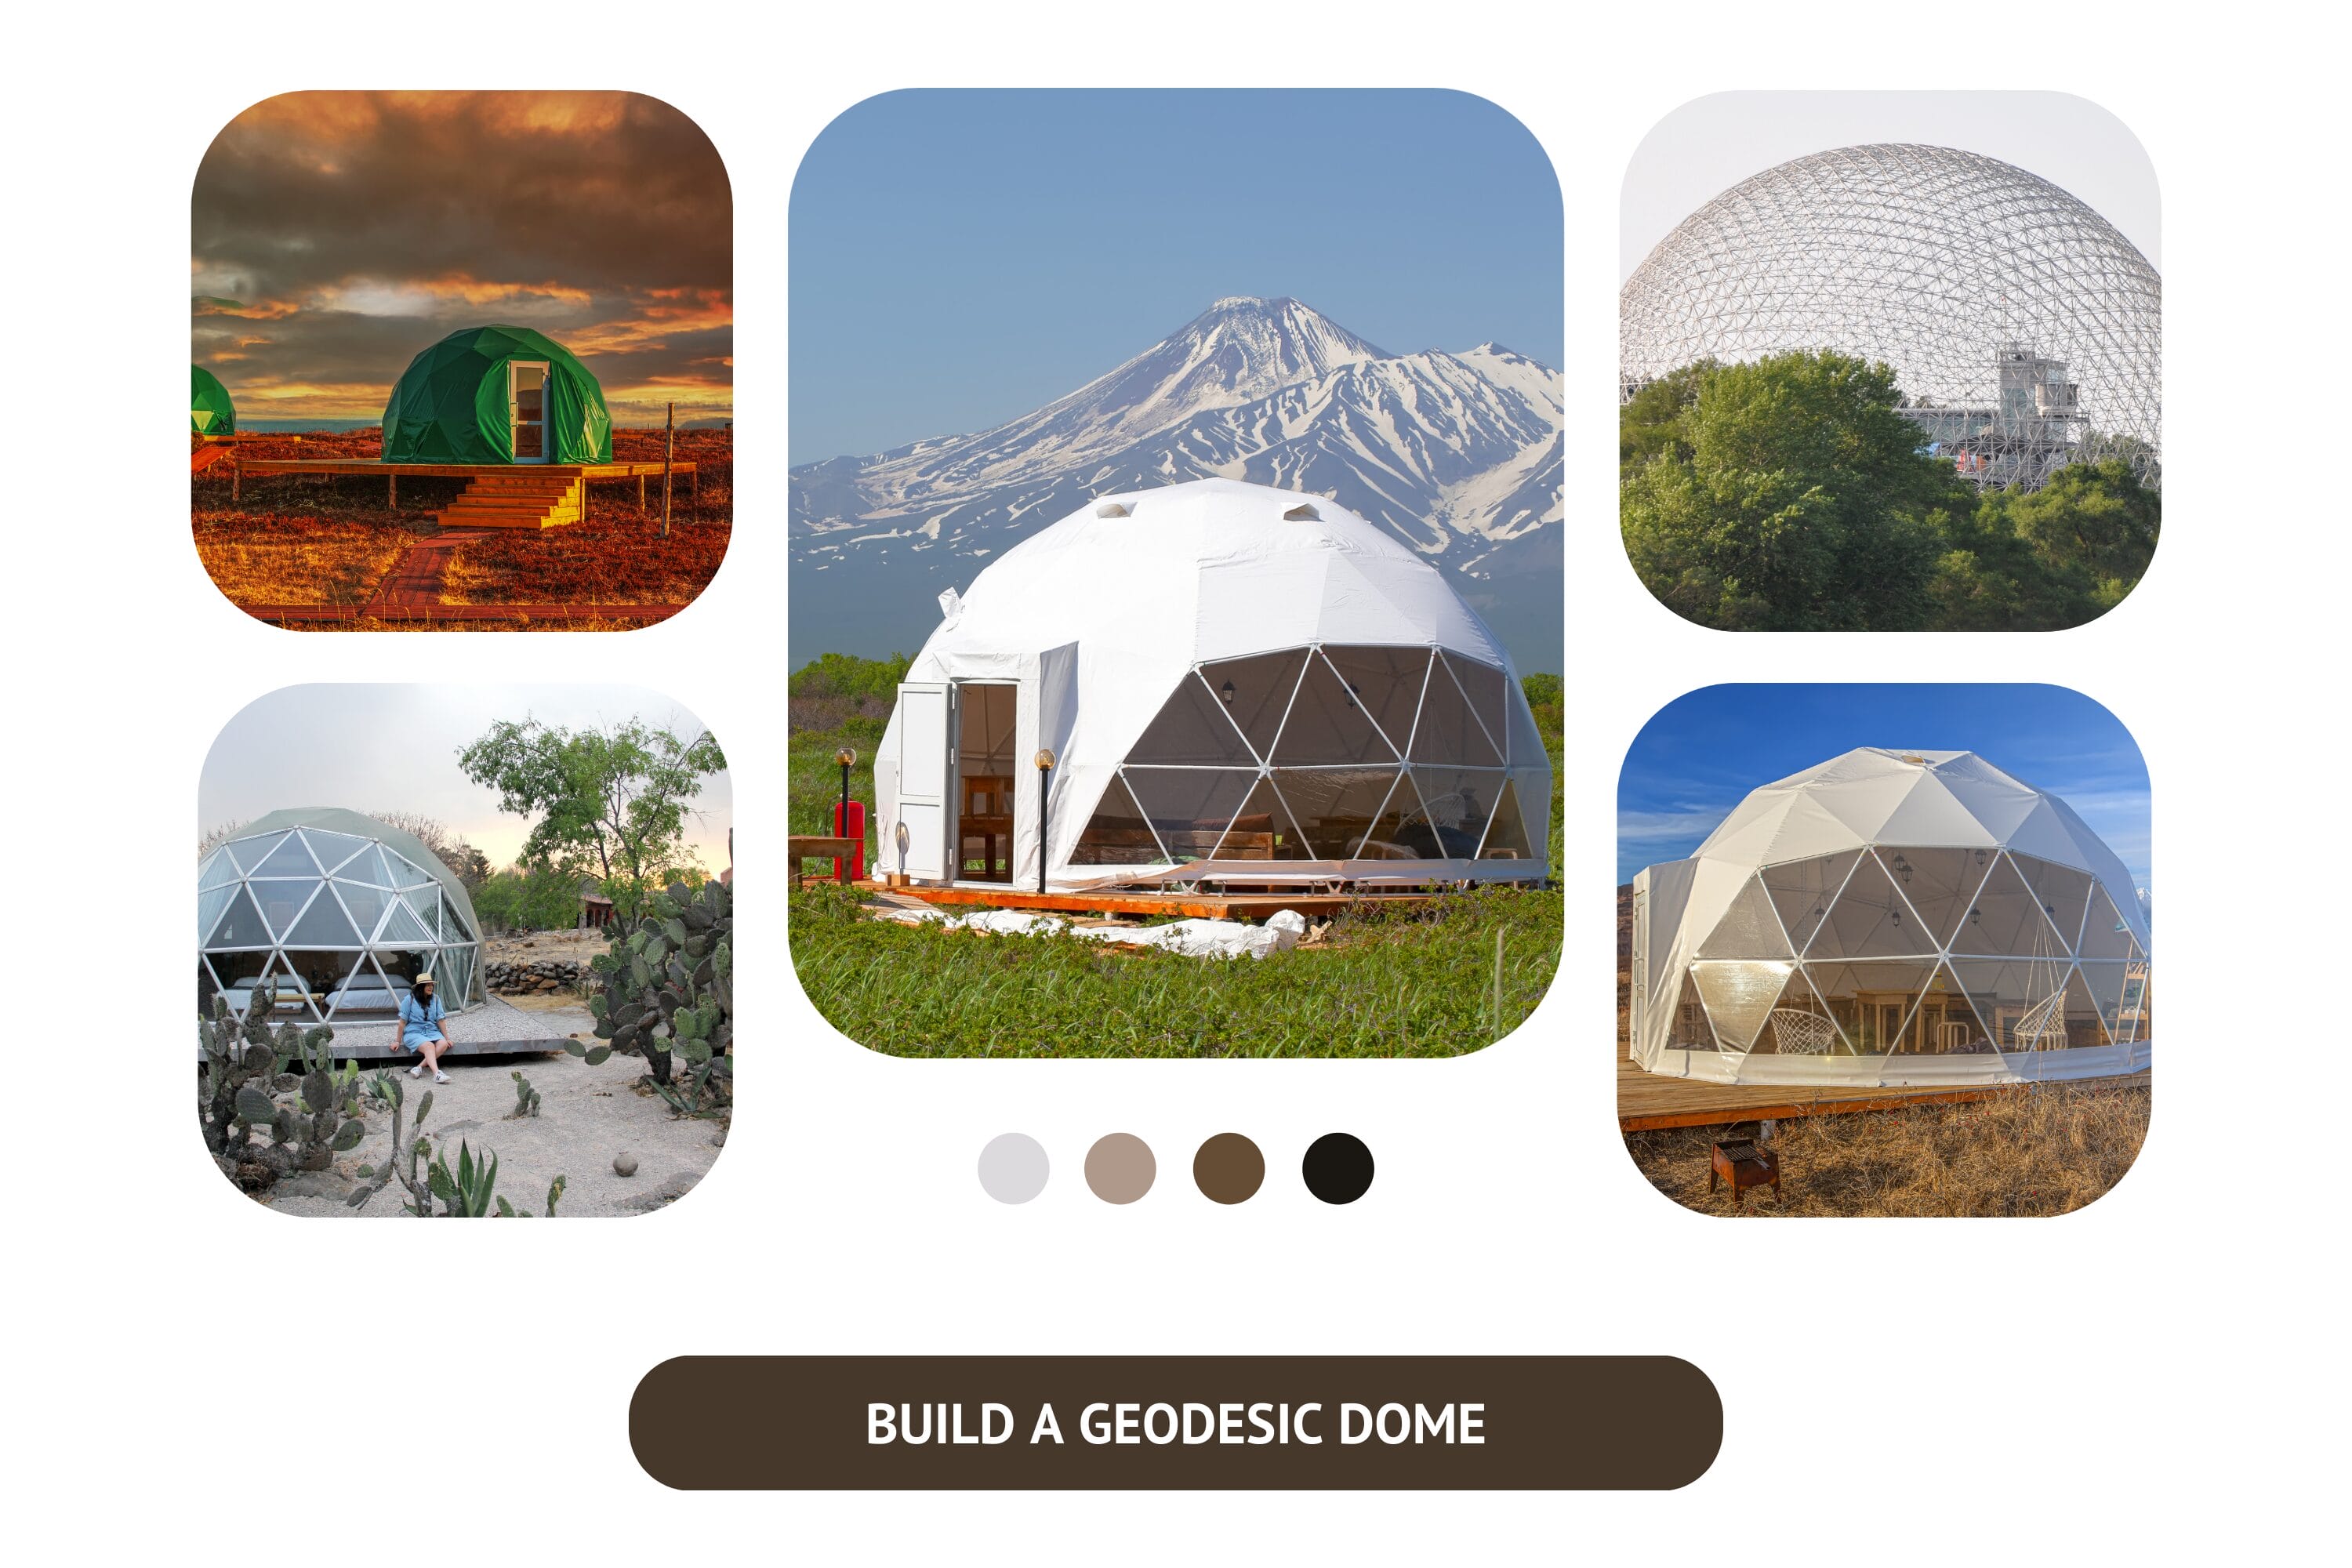 Construct a Geodesic Dome.